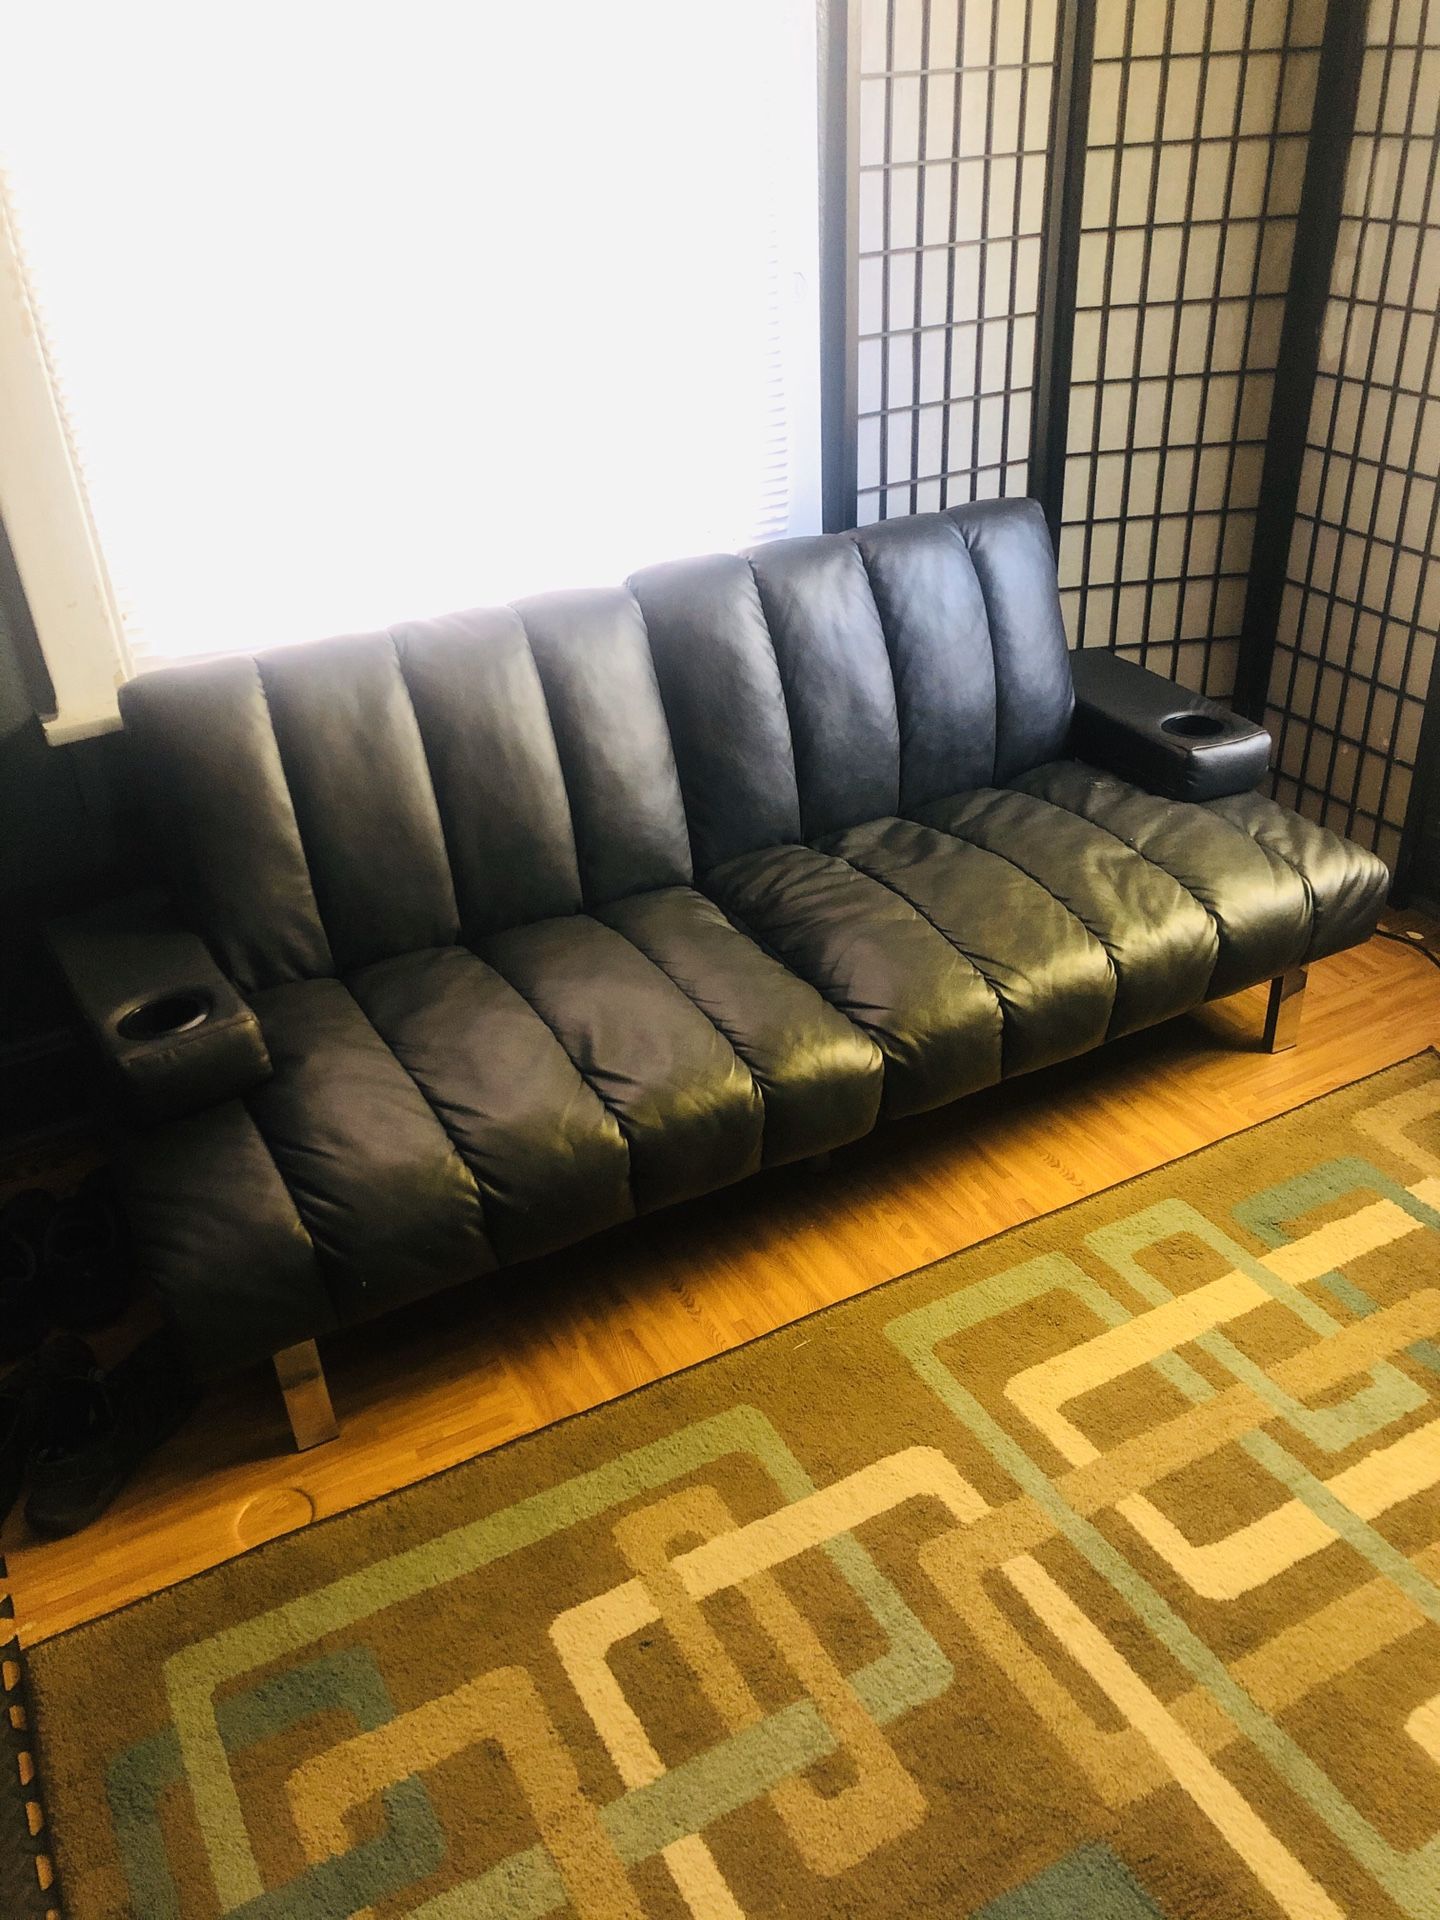 Futon leather adjustable/couch/bed or chair...Will do electronic trades